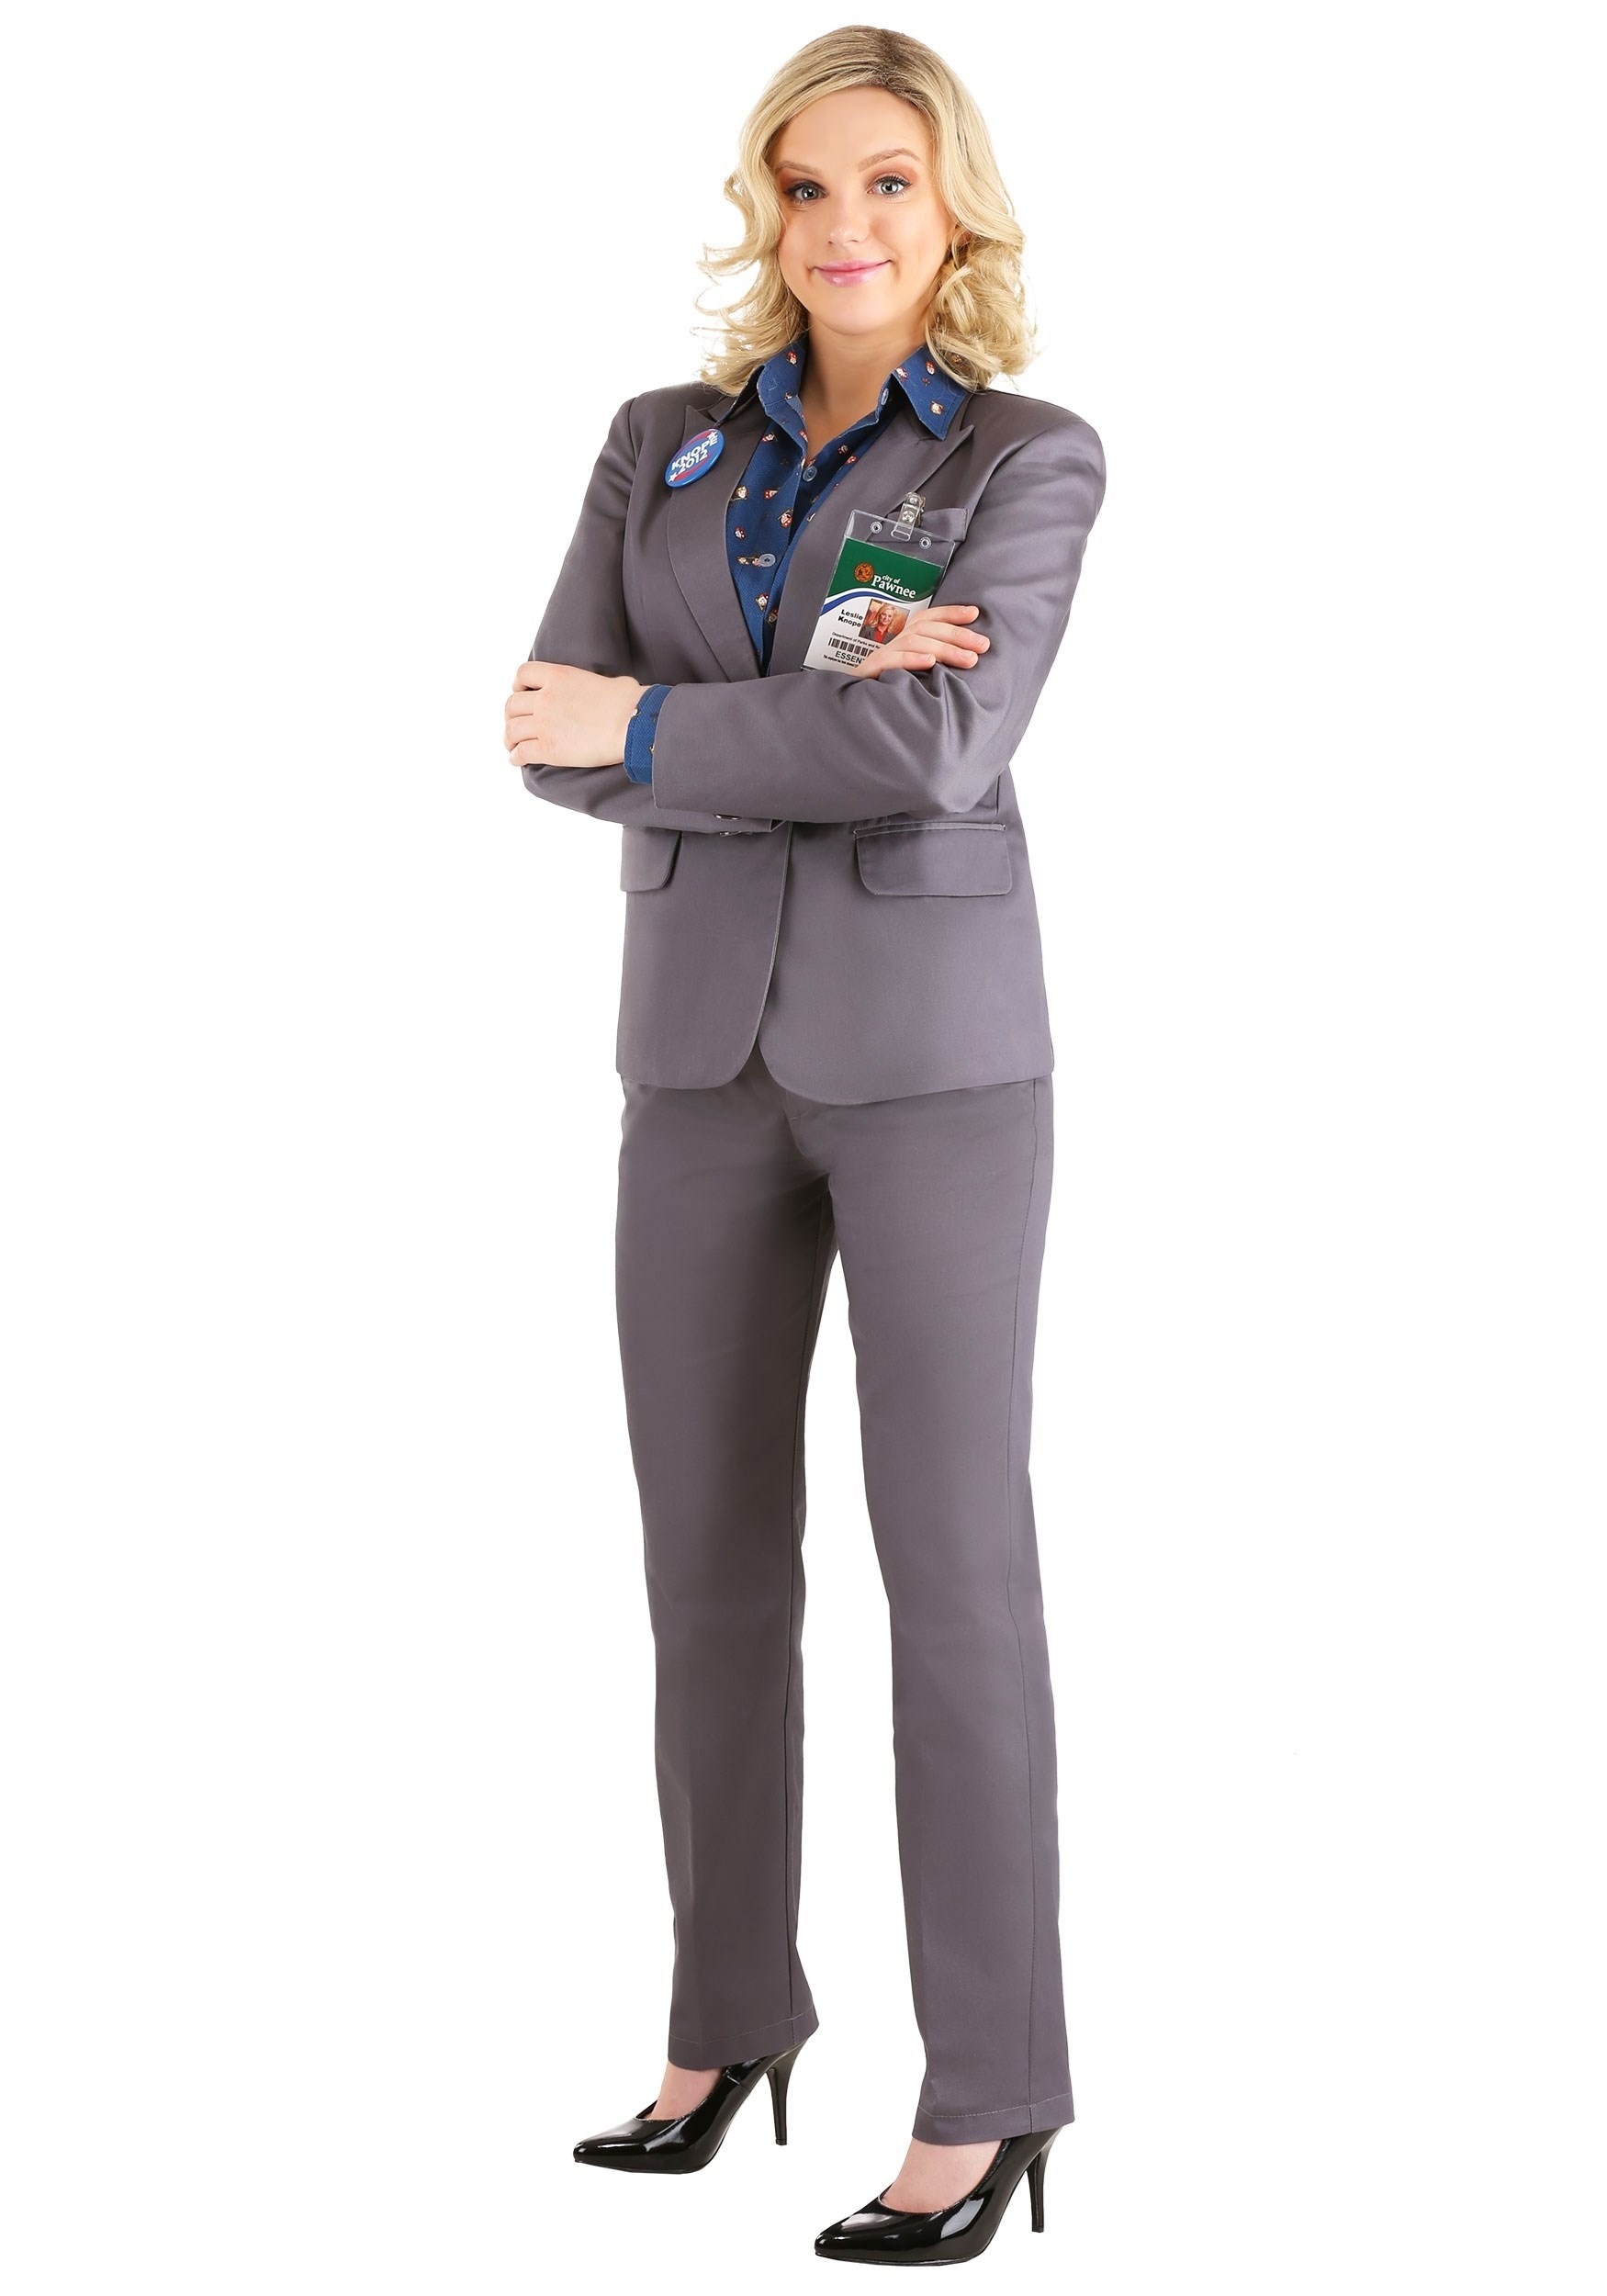 Image of Leslie Knope Parks and Recreation Costume ID FUN1480AD-XL